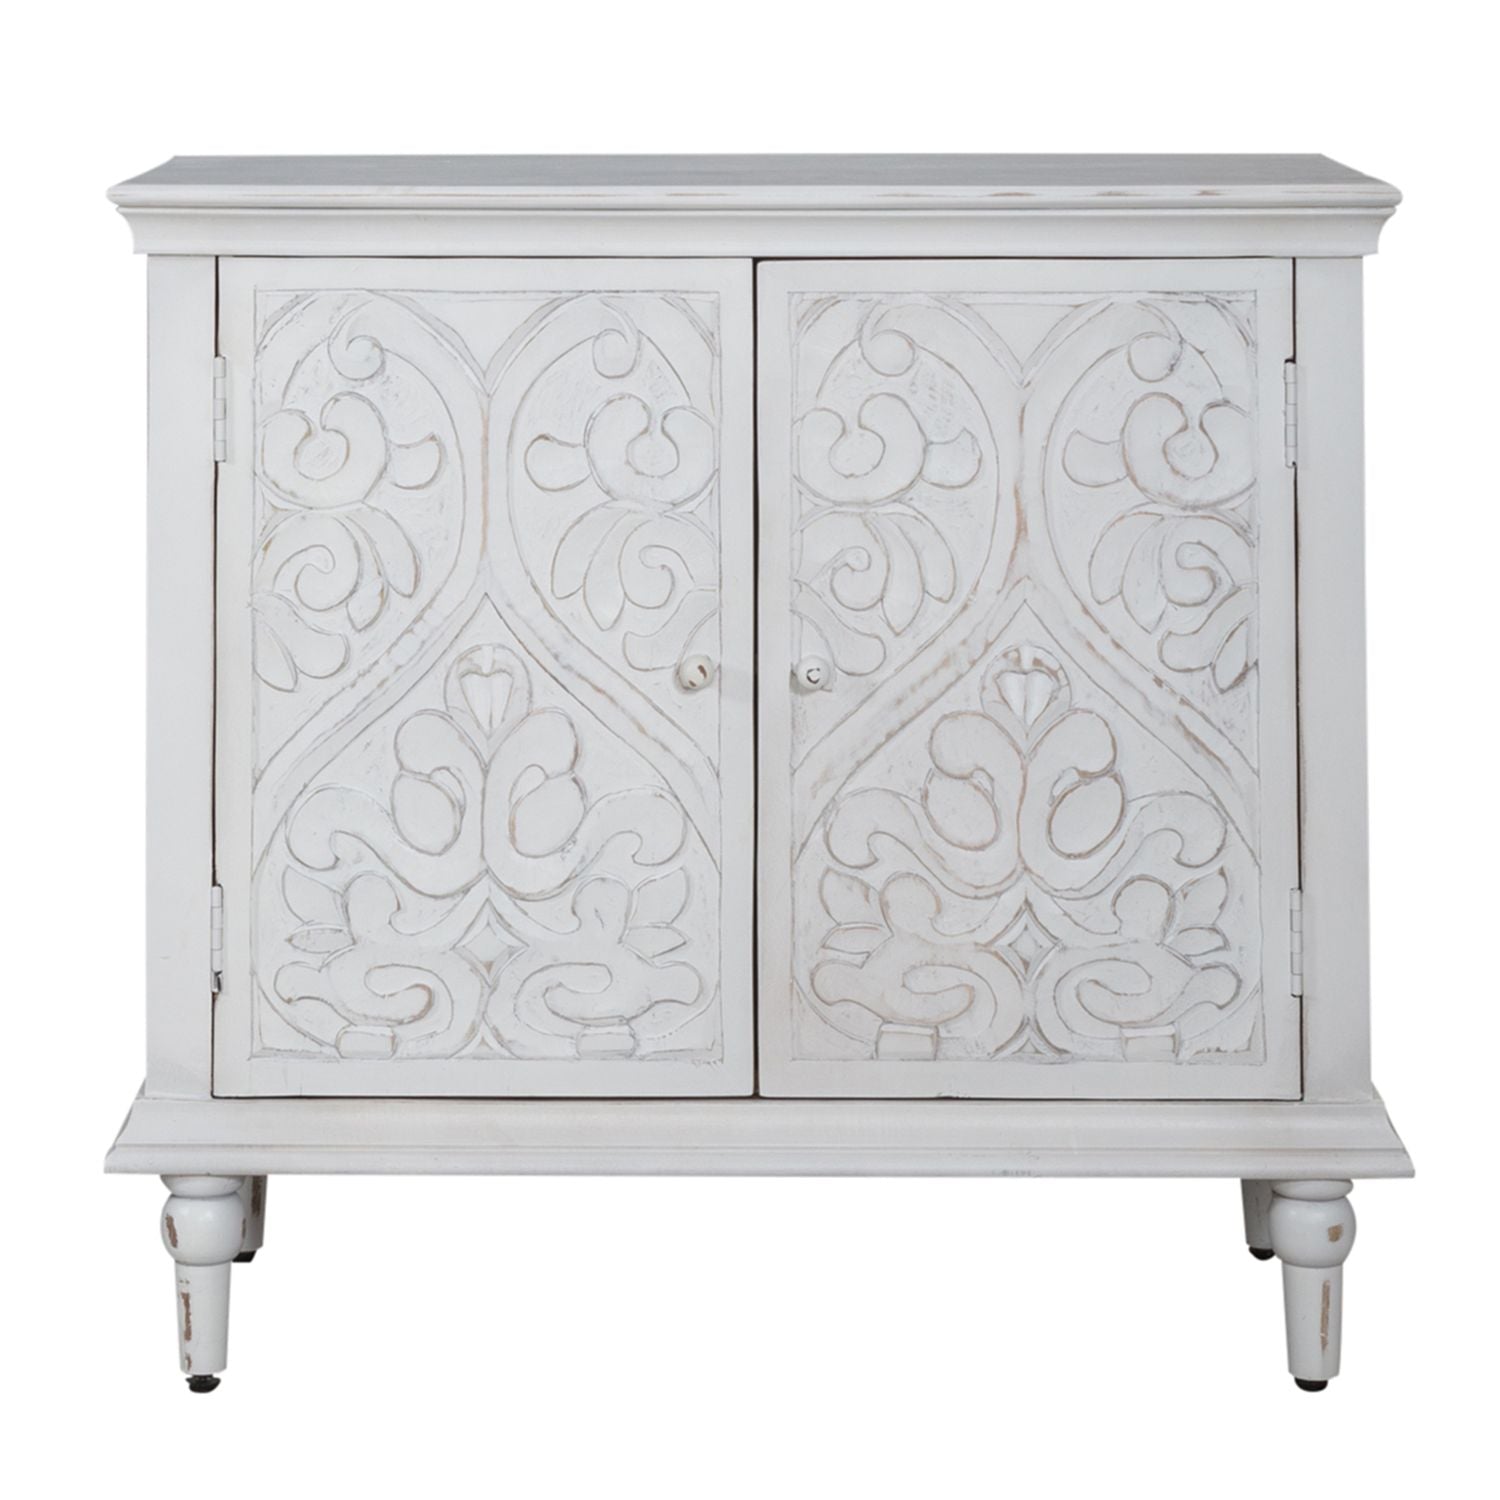 French Quarter / 2 Door Accent Cabinet from Liberty Furniture